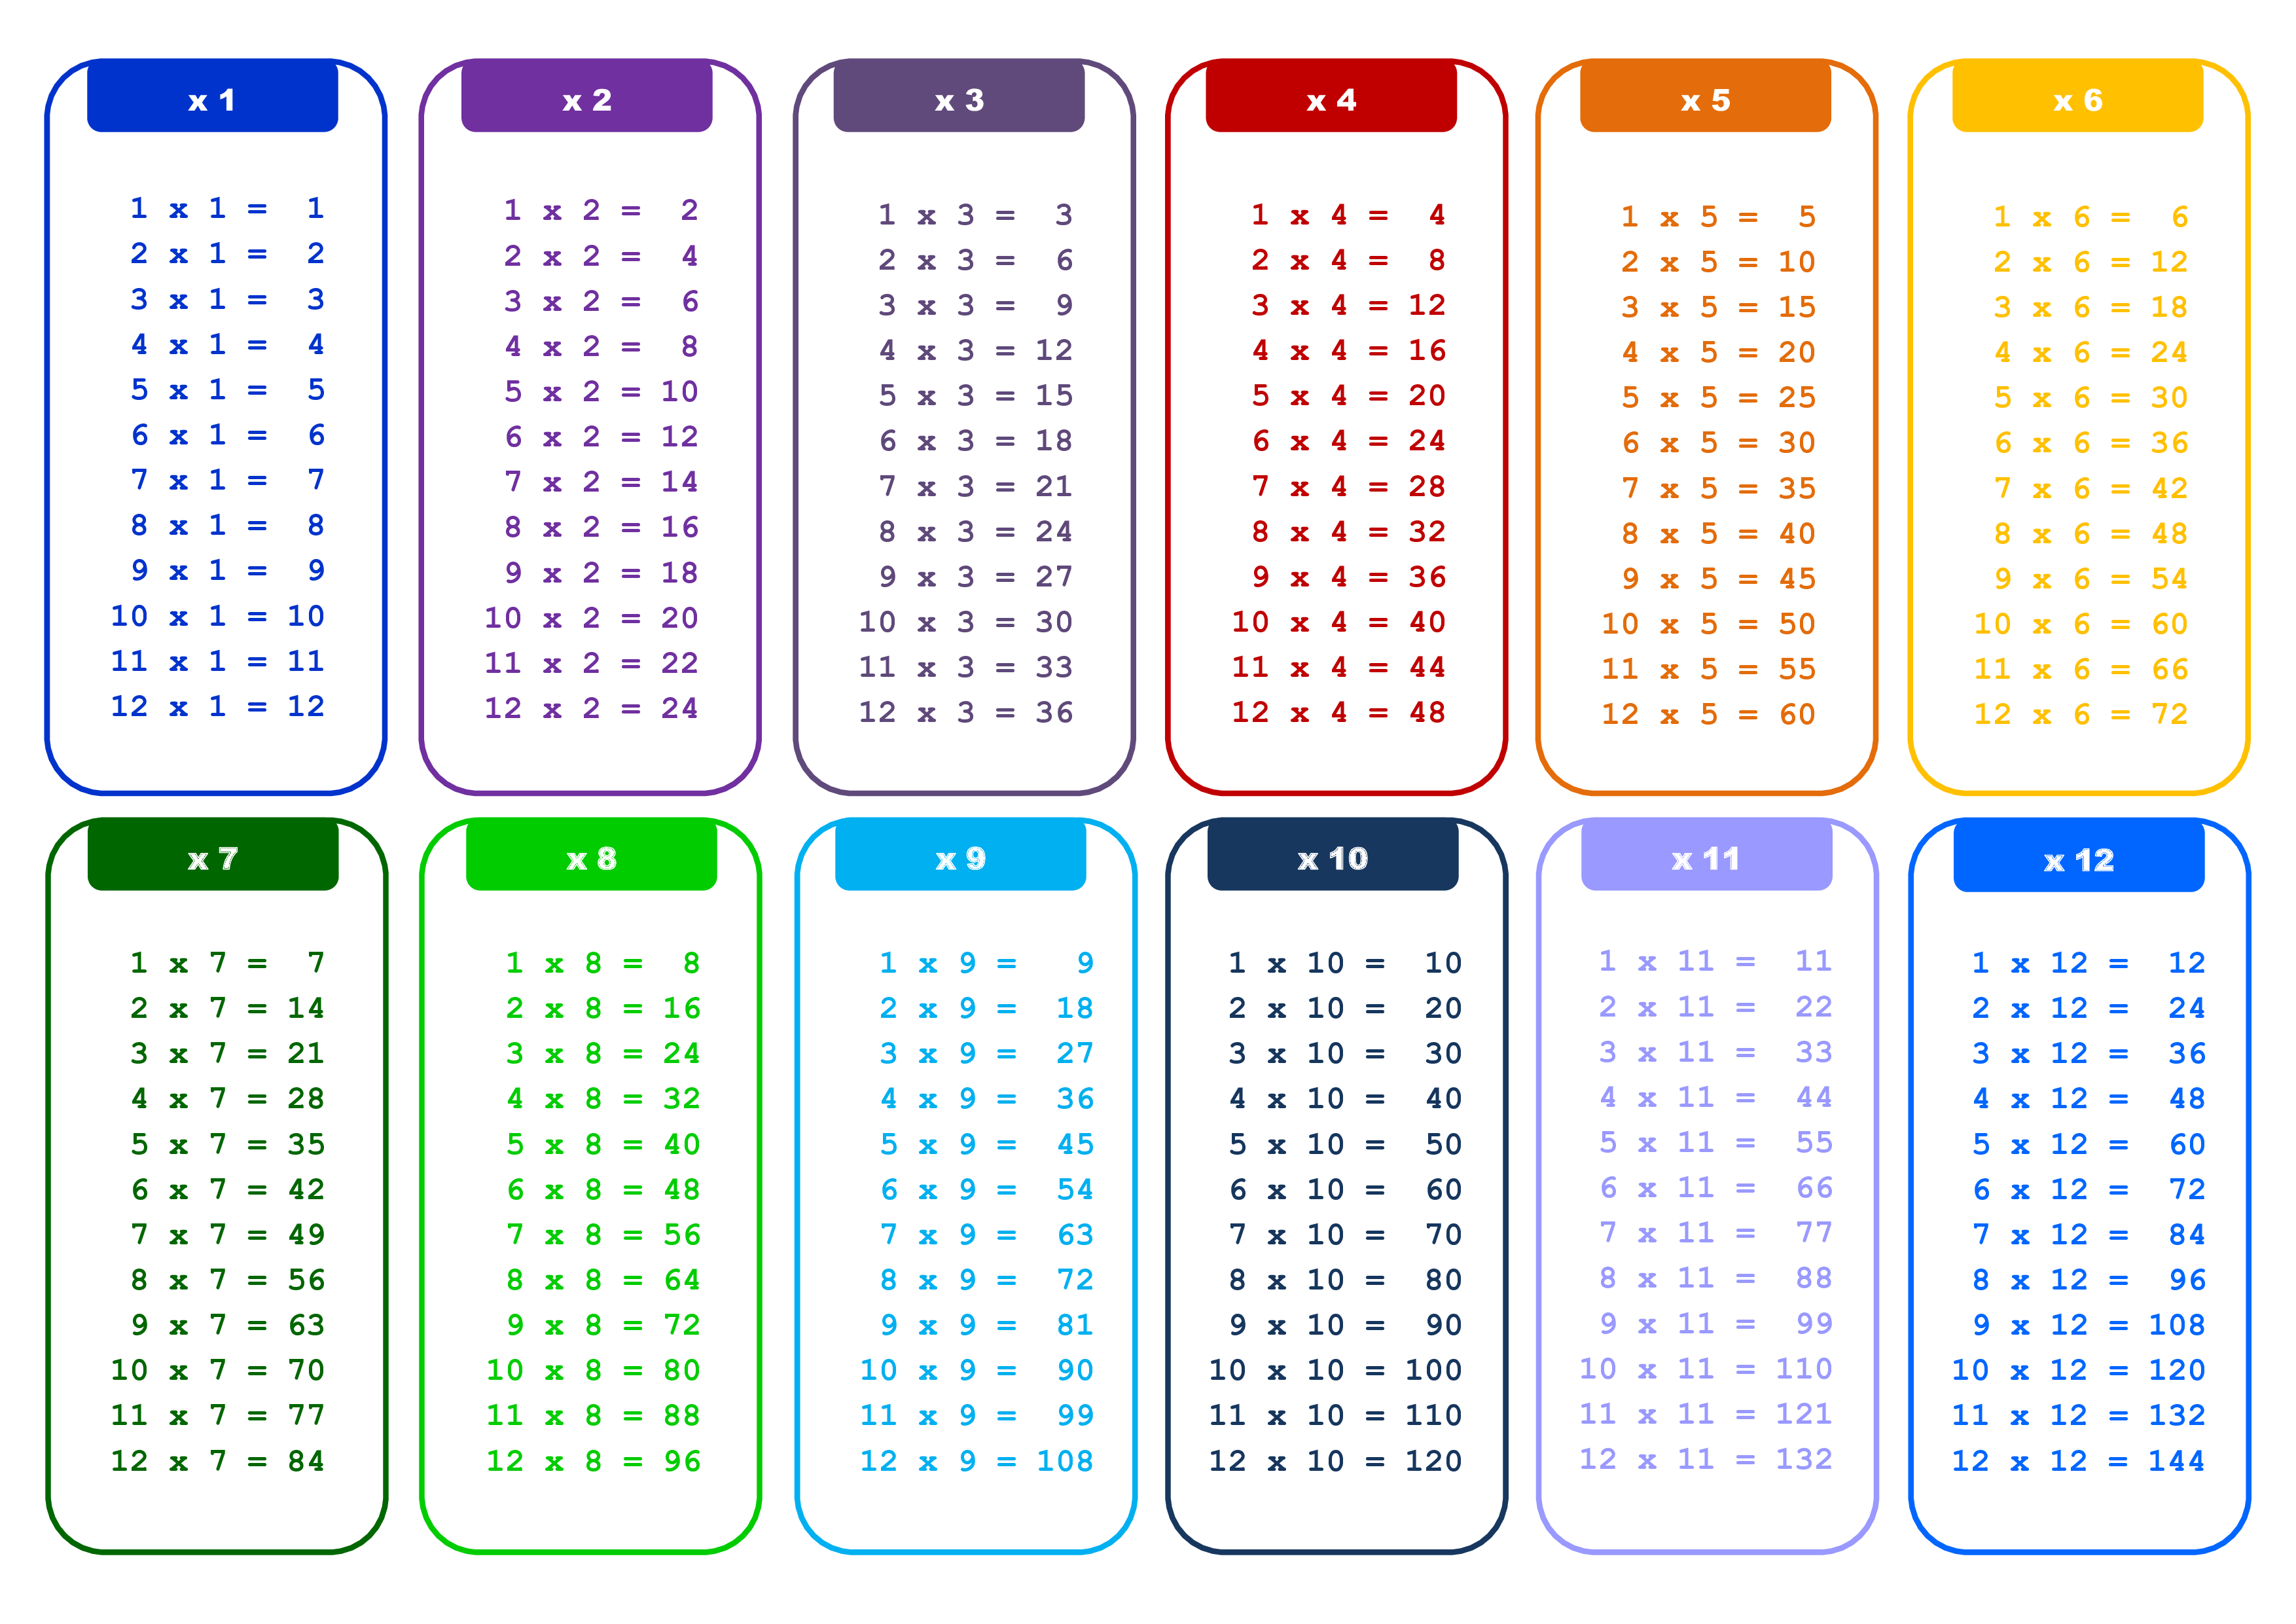 X12 Times Table Chart main image